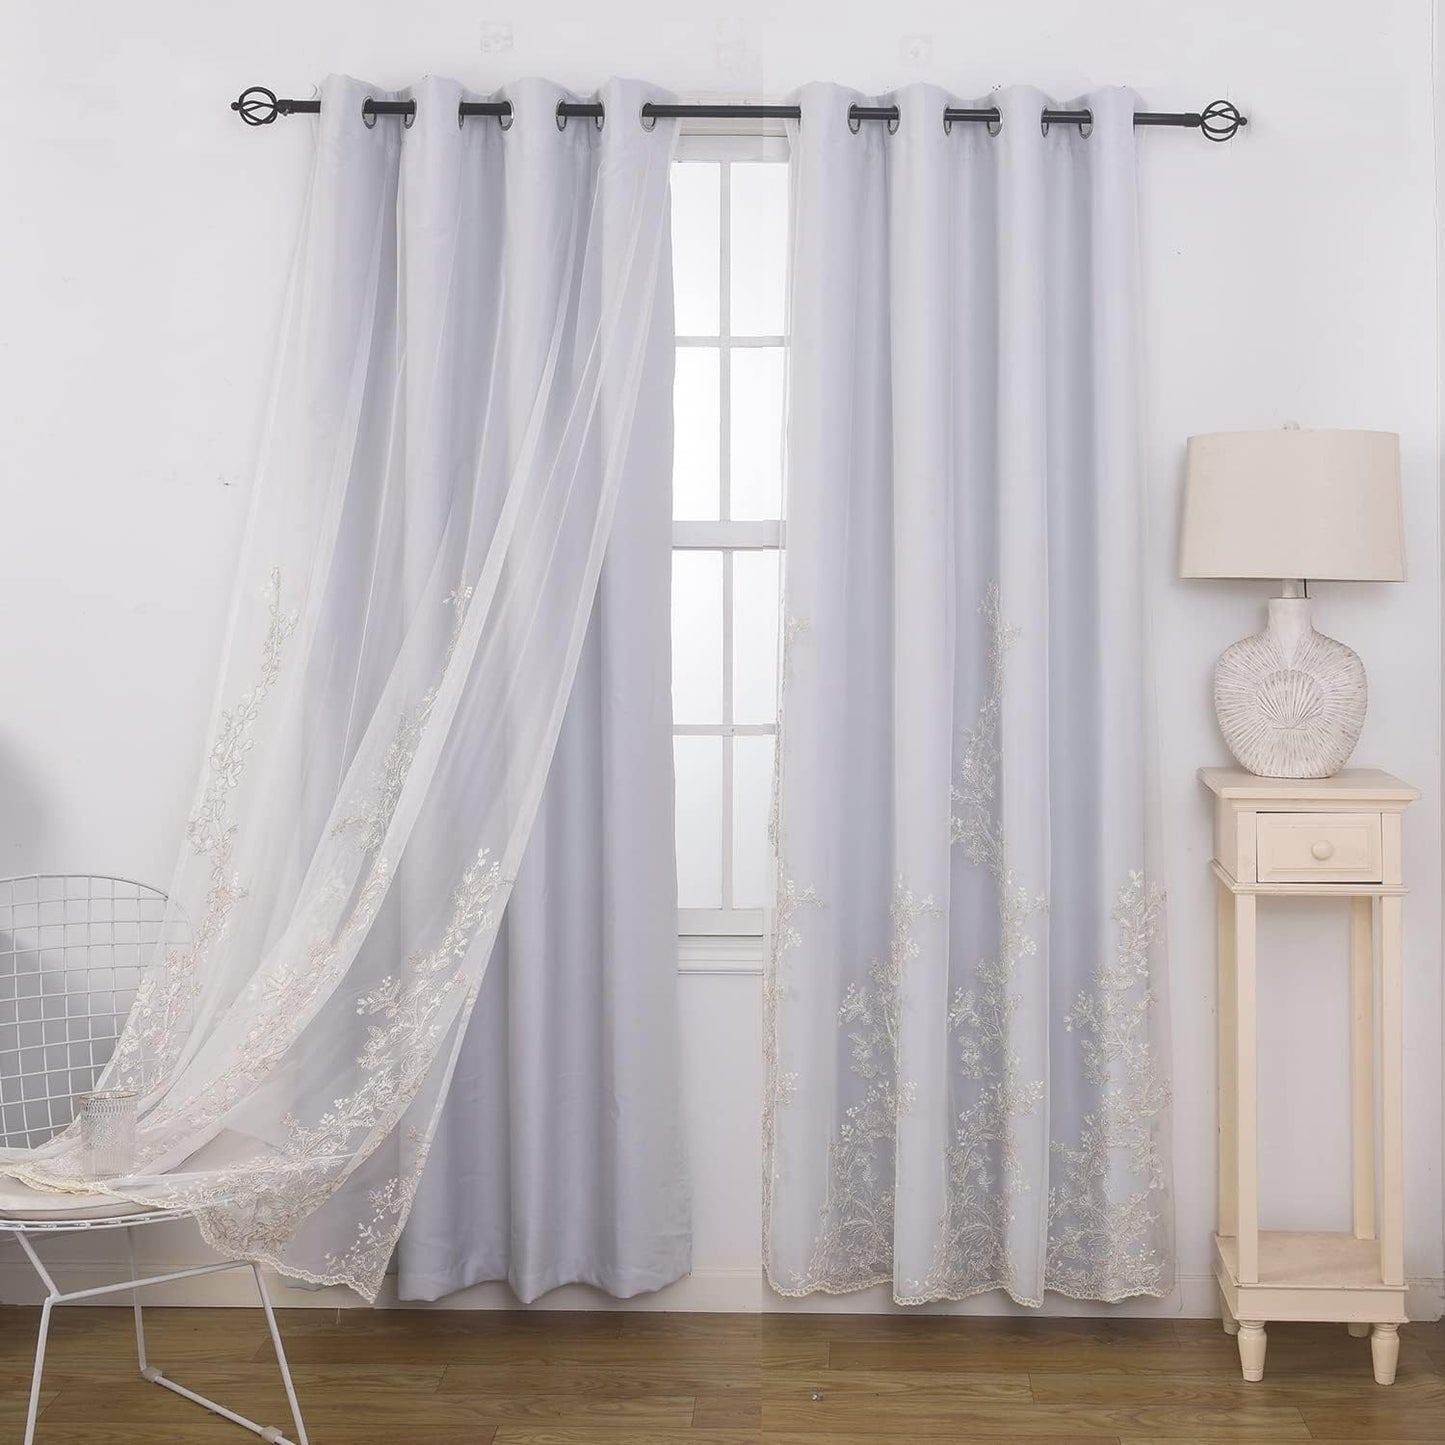 GYROHOME Double Layered Curtains with Embroidered White Sheer Tulle, Mix and Match Curtains Room Darkening Grommet Top Thermal Insulated Drapes,2Panels,52X84Inch,Beige  GYROHOME Greyish White 52Wx63Lx2 